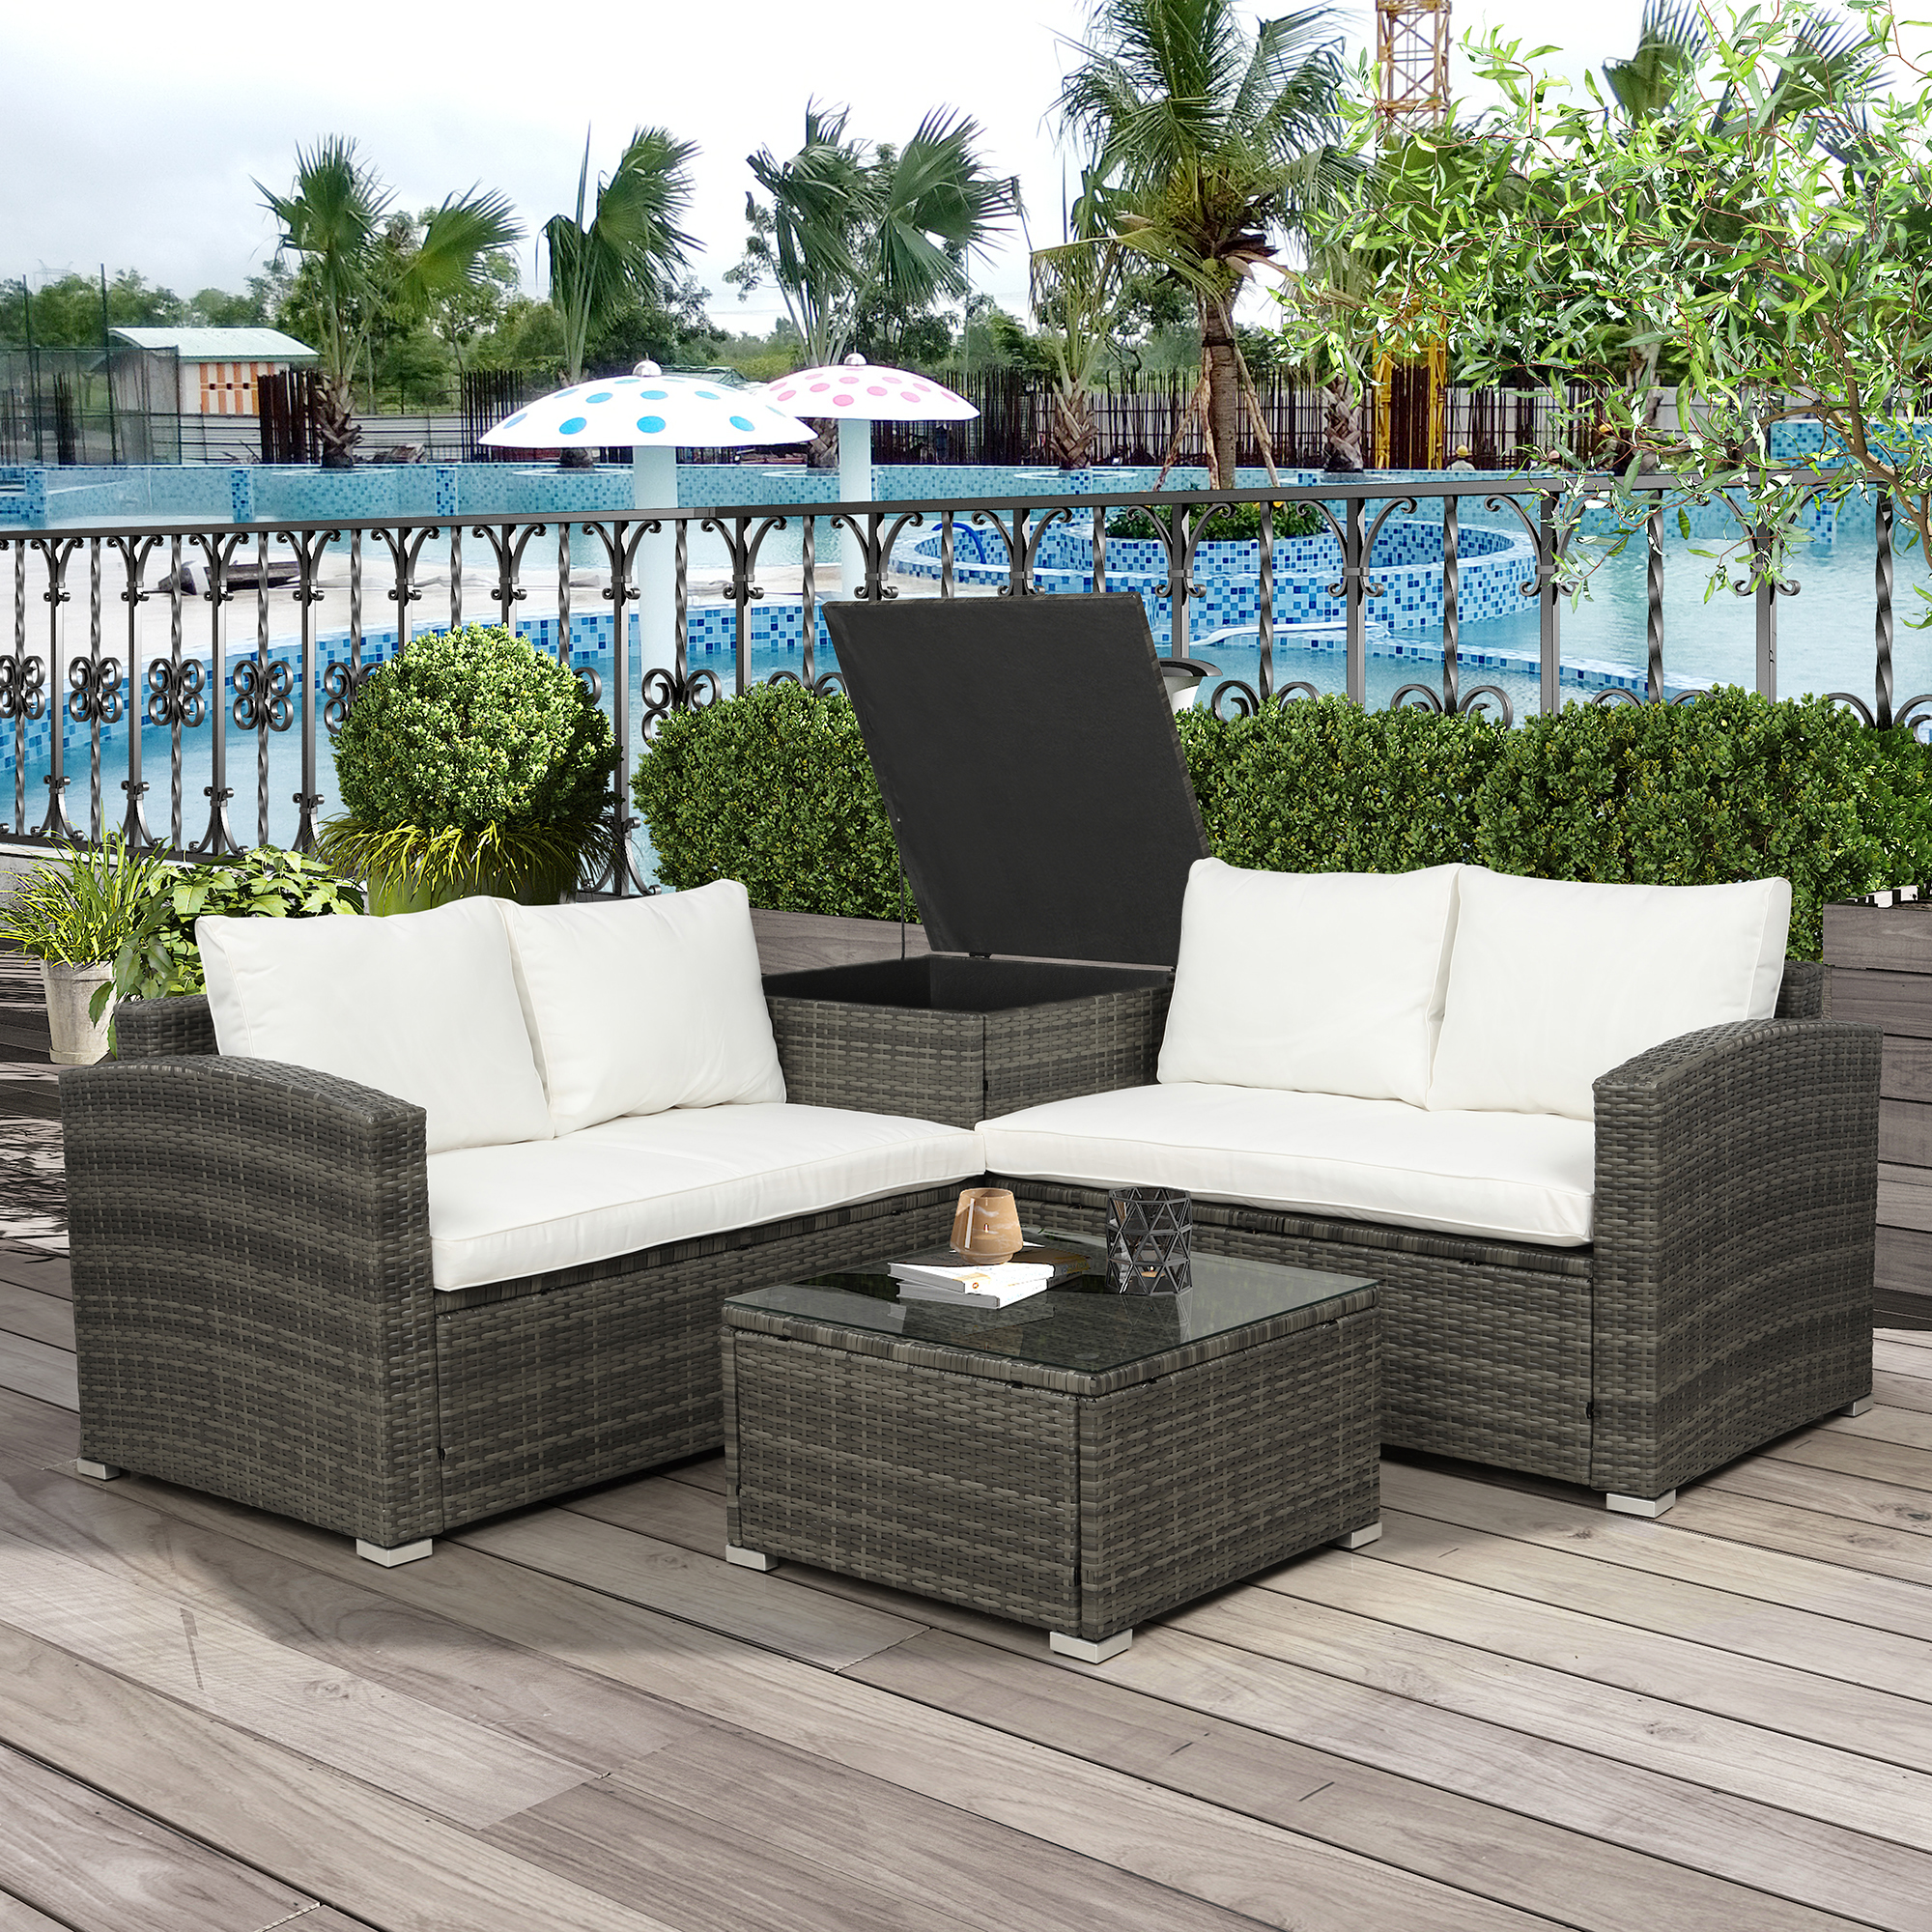 Outdoor Patio Furniture Set, 4-Piece Gray Wicker Patio Furniture Sets, Rattan Wicker Conversation Set w/L-Seats Sofa, R-Seats Sofa, Cushion box, Glass Dining Table, Padded Cushions, Beige, S13126 - image 3 of 7